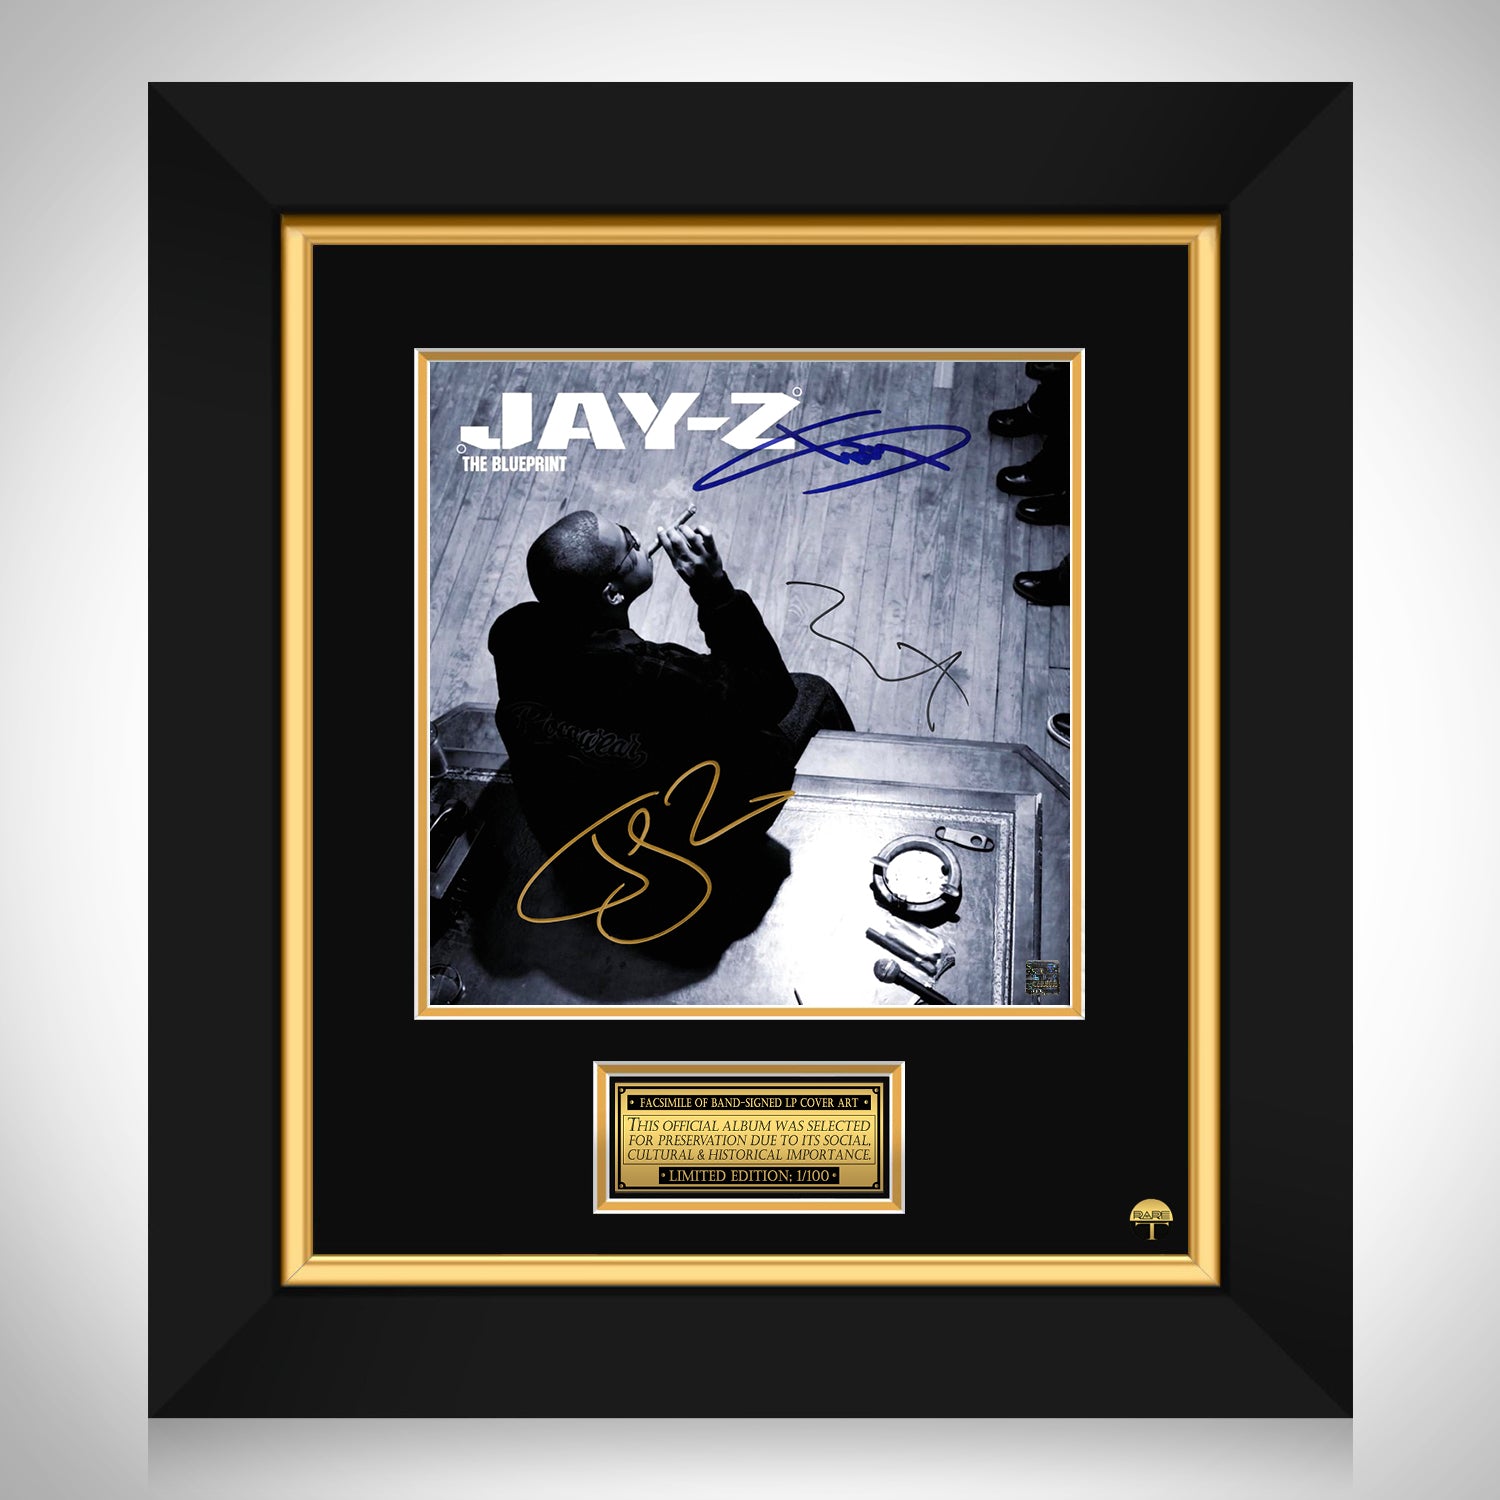 Jay-Z - The Blueprint LP Cover Limited Signature Edition Custom 